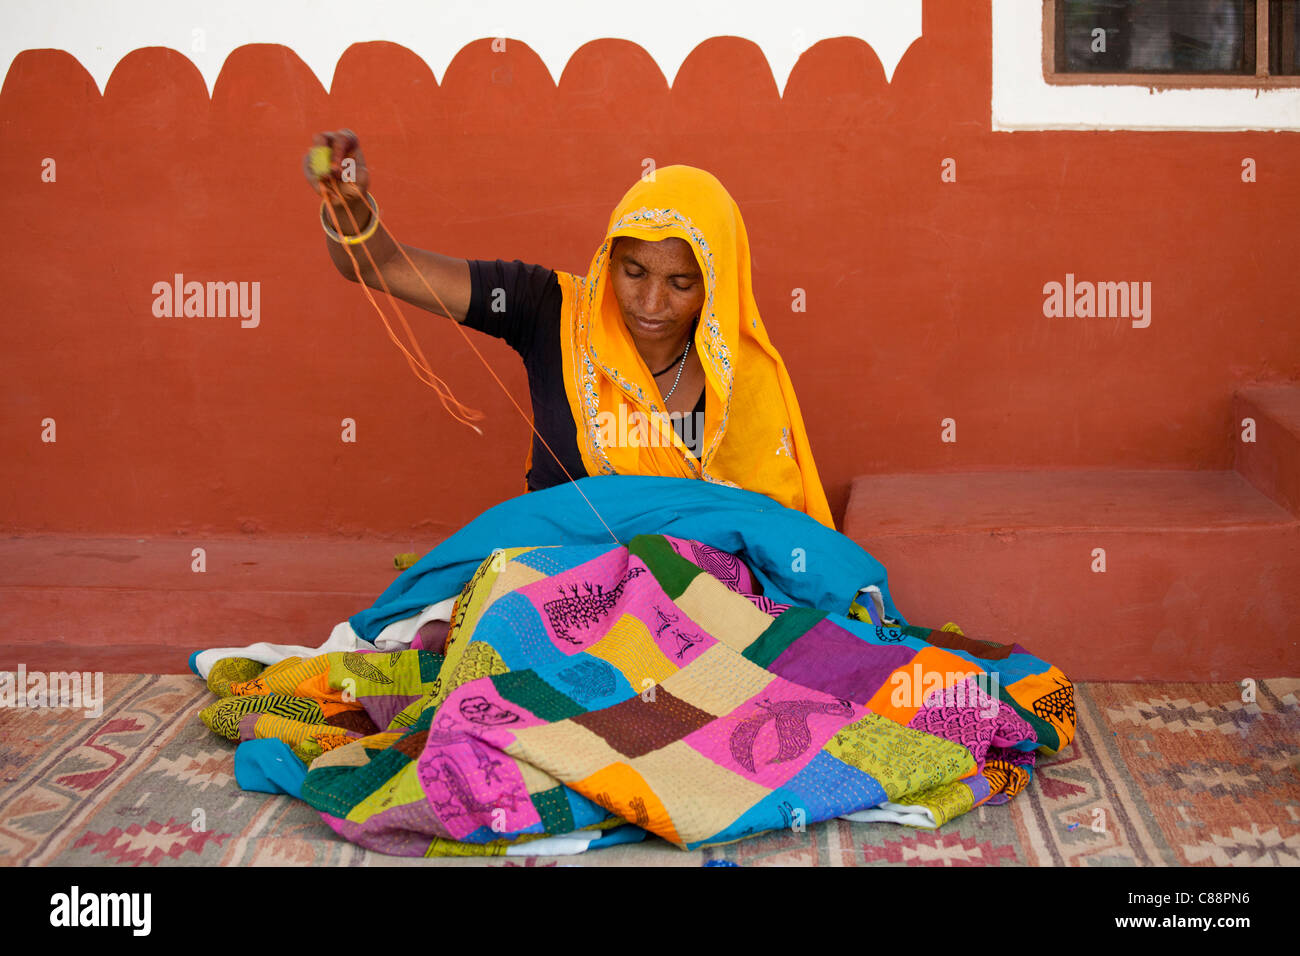 Indian woman sewing textiles at Dastkar women's craft co-operative, the Ranthambore Artisan Project, in Rajasthan, India Stock Photo